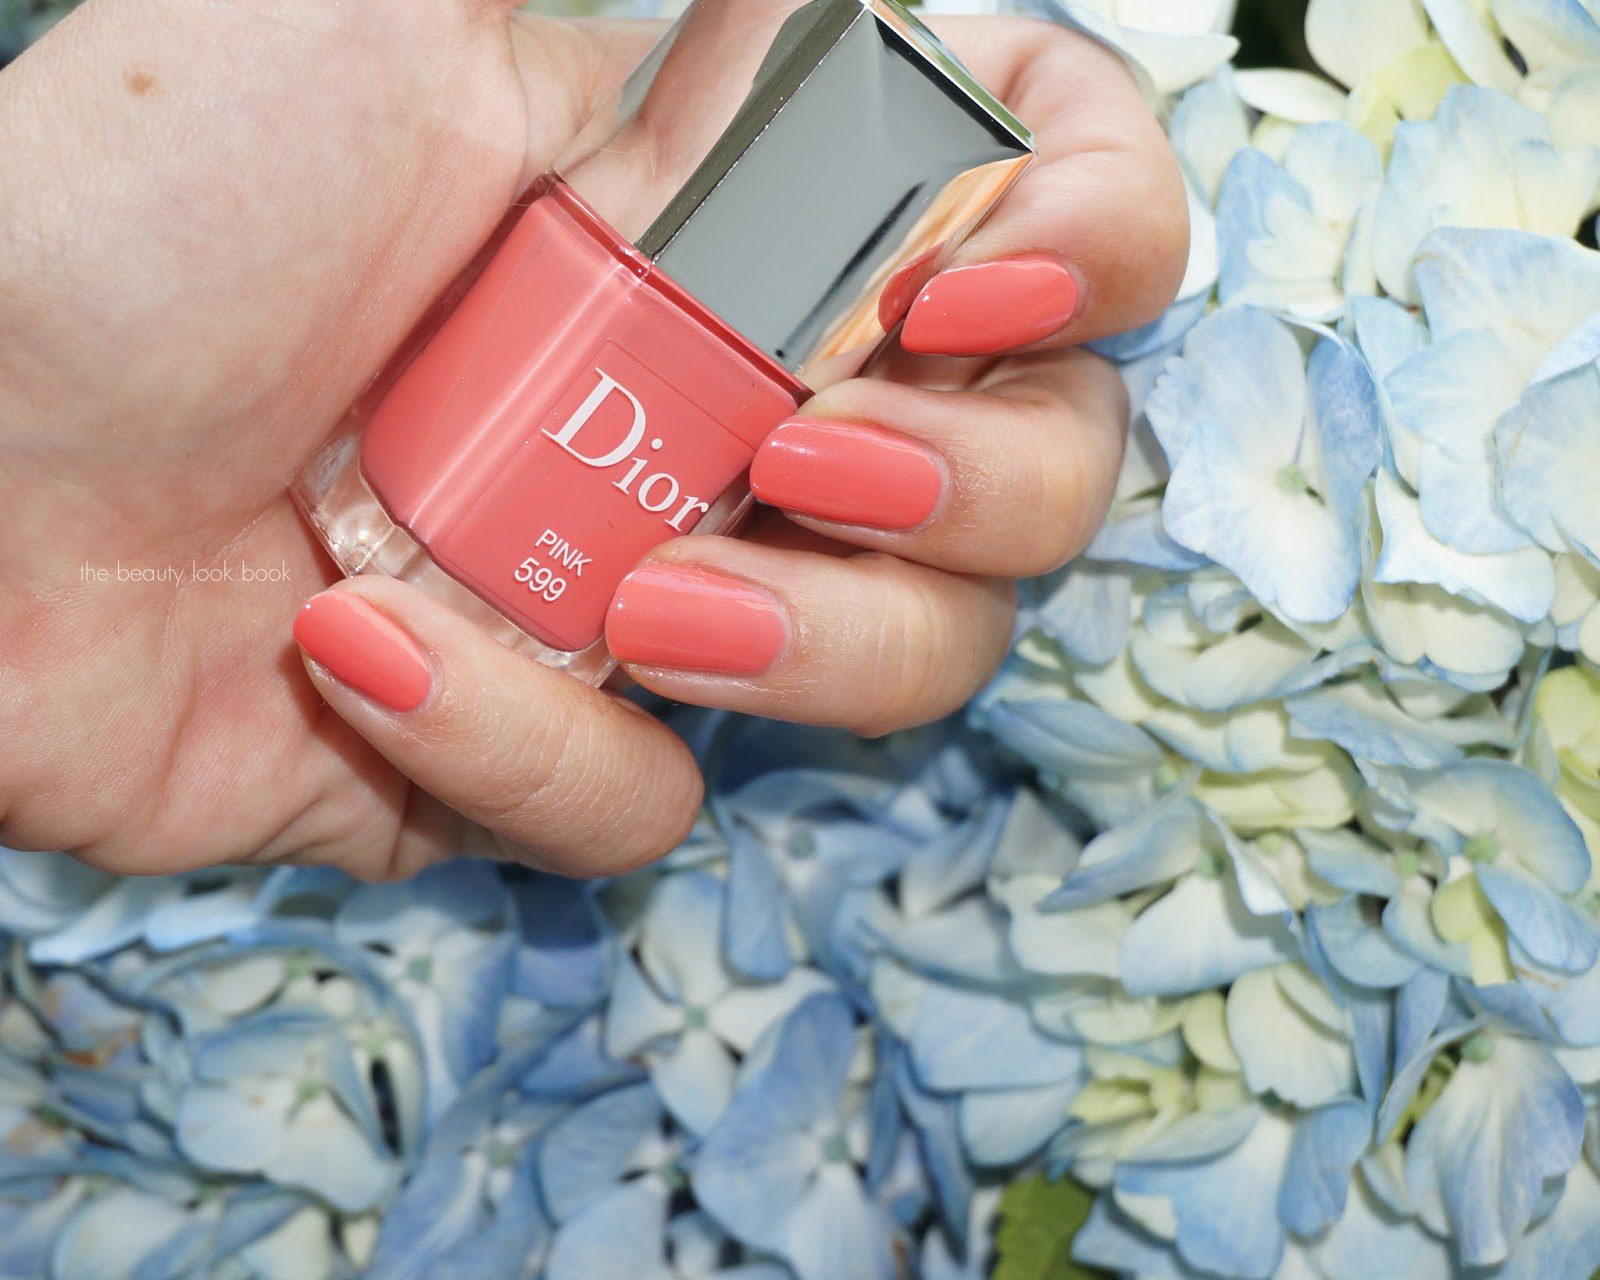 Dior Vernis in Rose 499, Pink 599 and 